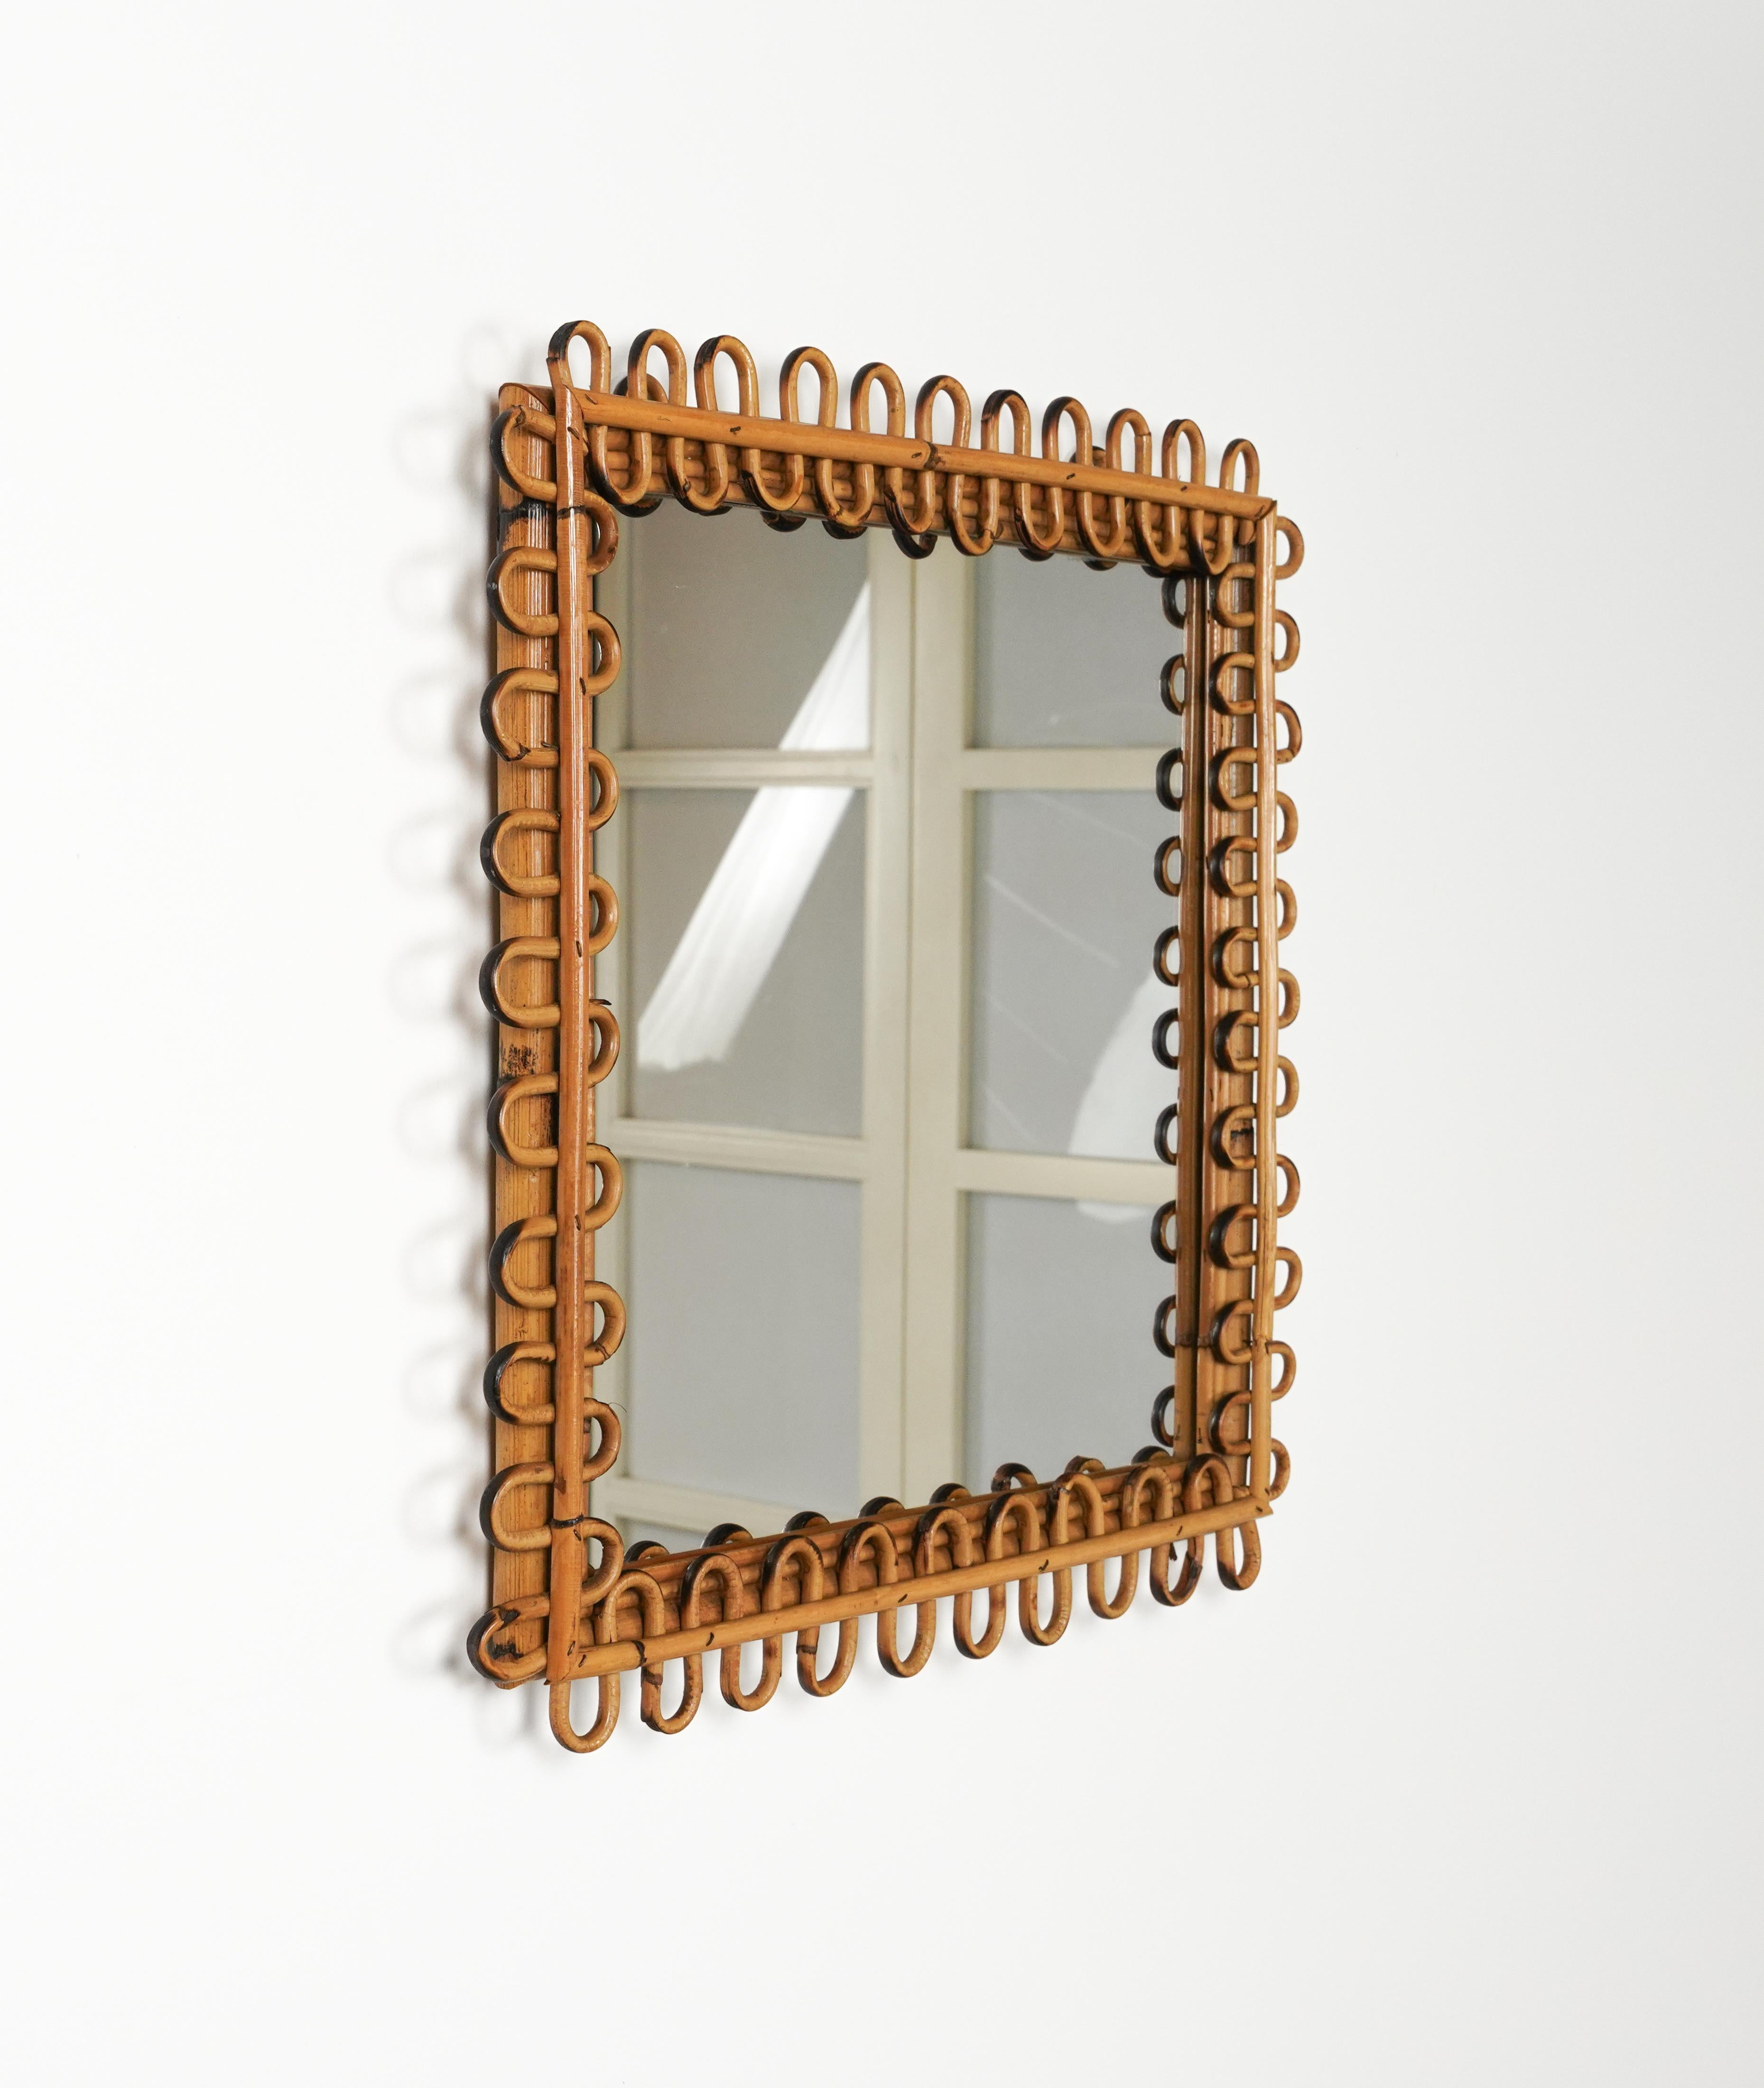 Midcentury Rattan & Bamboo Squared Wall Mirror Franco Albini Style, Italy 1960s For Sale 3